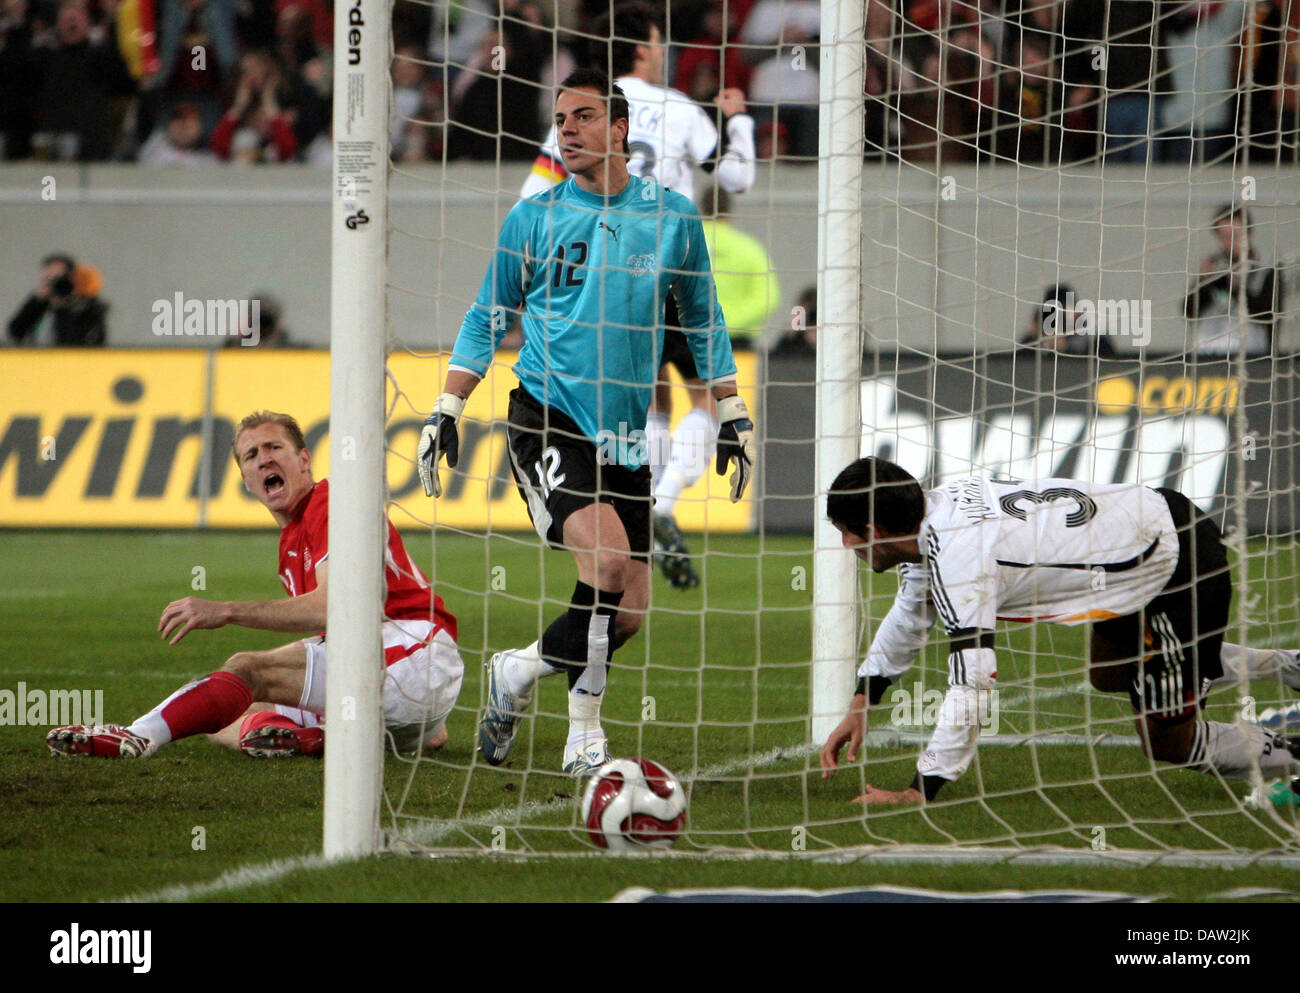 German national team player Kevin Kuranyi starts to celebrate his 2-0 goal while Swiss players Stephane Grichting and goalkeeper Diego Benaglio are shocked during a routine international friendly at the LTU Arena stadium in Duesseldorf, Germany, Wednesday, 07 February 2007. Germany cruised to a comfortable 3-1 win over Switzerland with goals from Kuranyi, Gomez and Frings. Photo: A Stock Photo